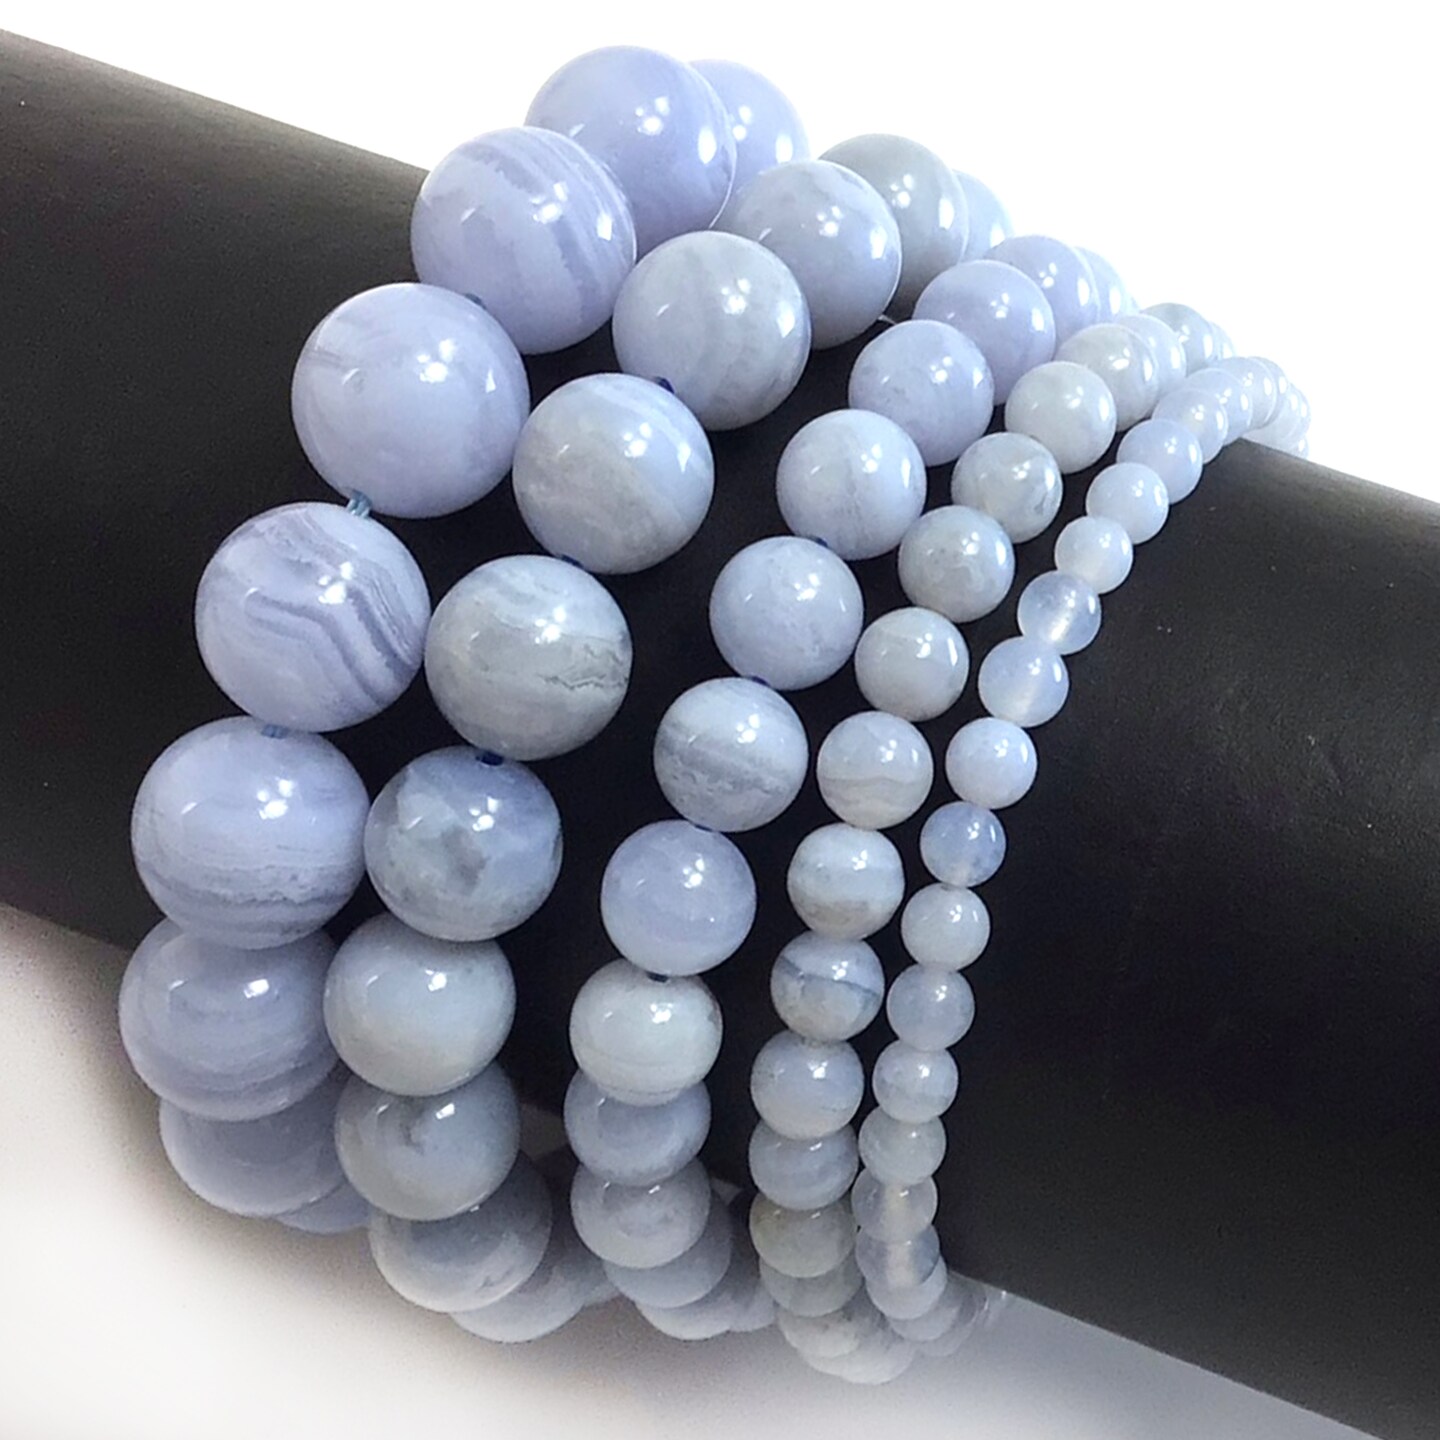 Blue Lace Agate, Amethyst & Opalite Crystal Bracelet with Silver Heart  Toggle